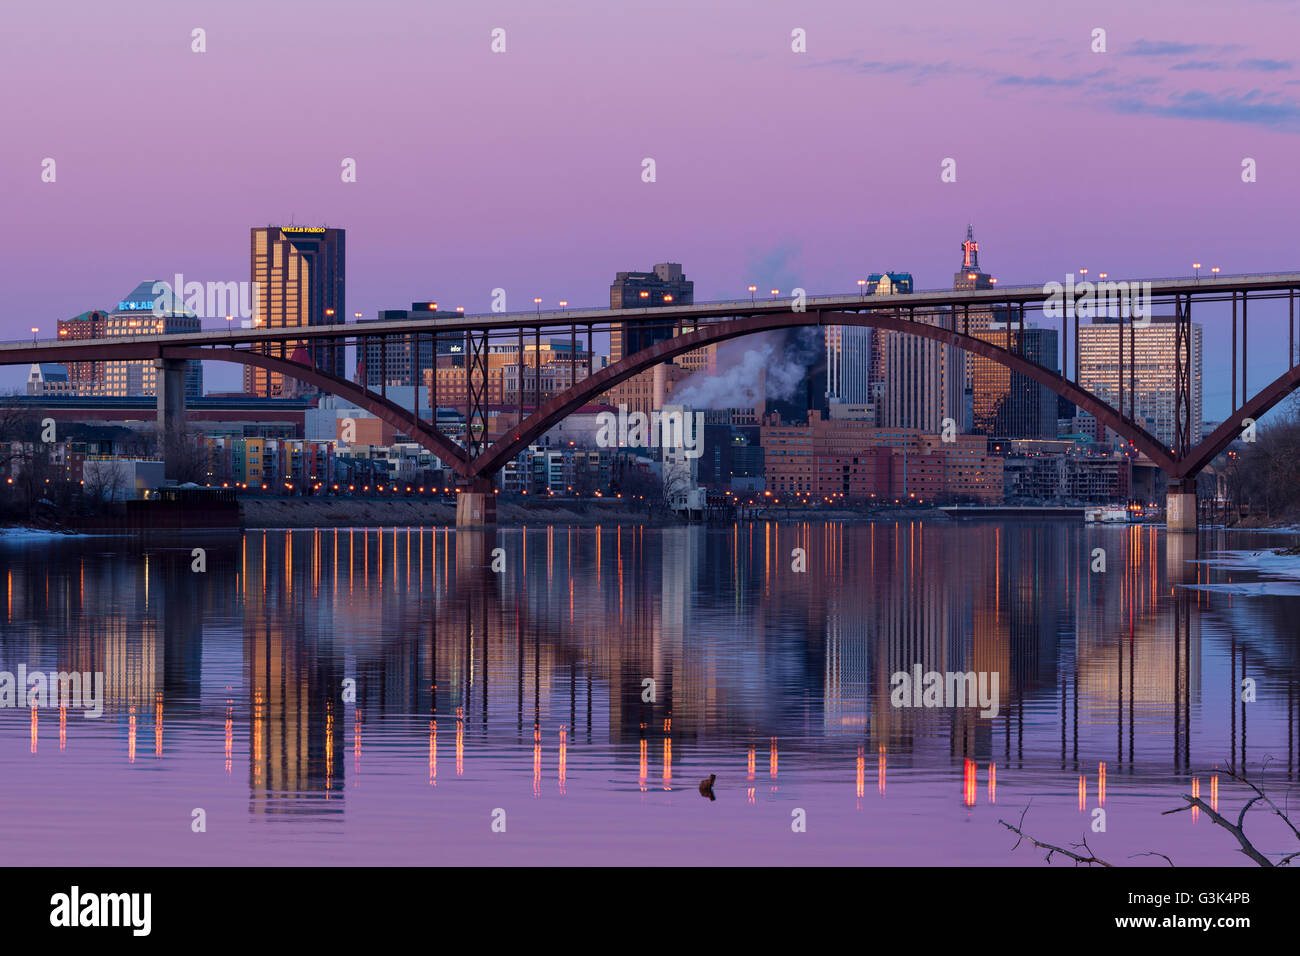 Saint Paul, Minnesota skyline at dusk with the Smith Ave High Bridge in the foreground. Stock Photo